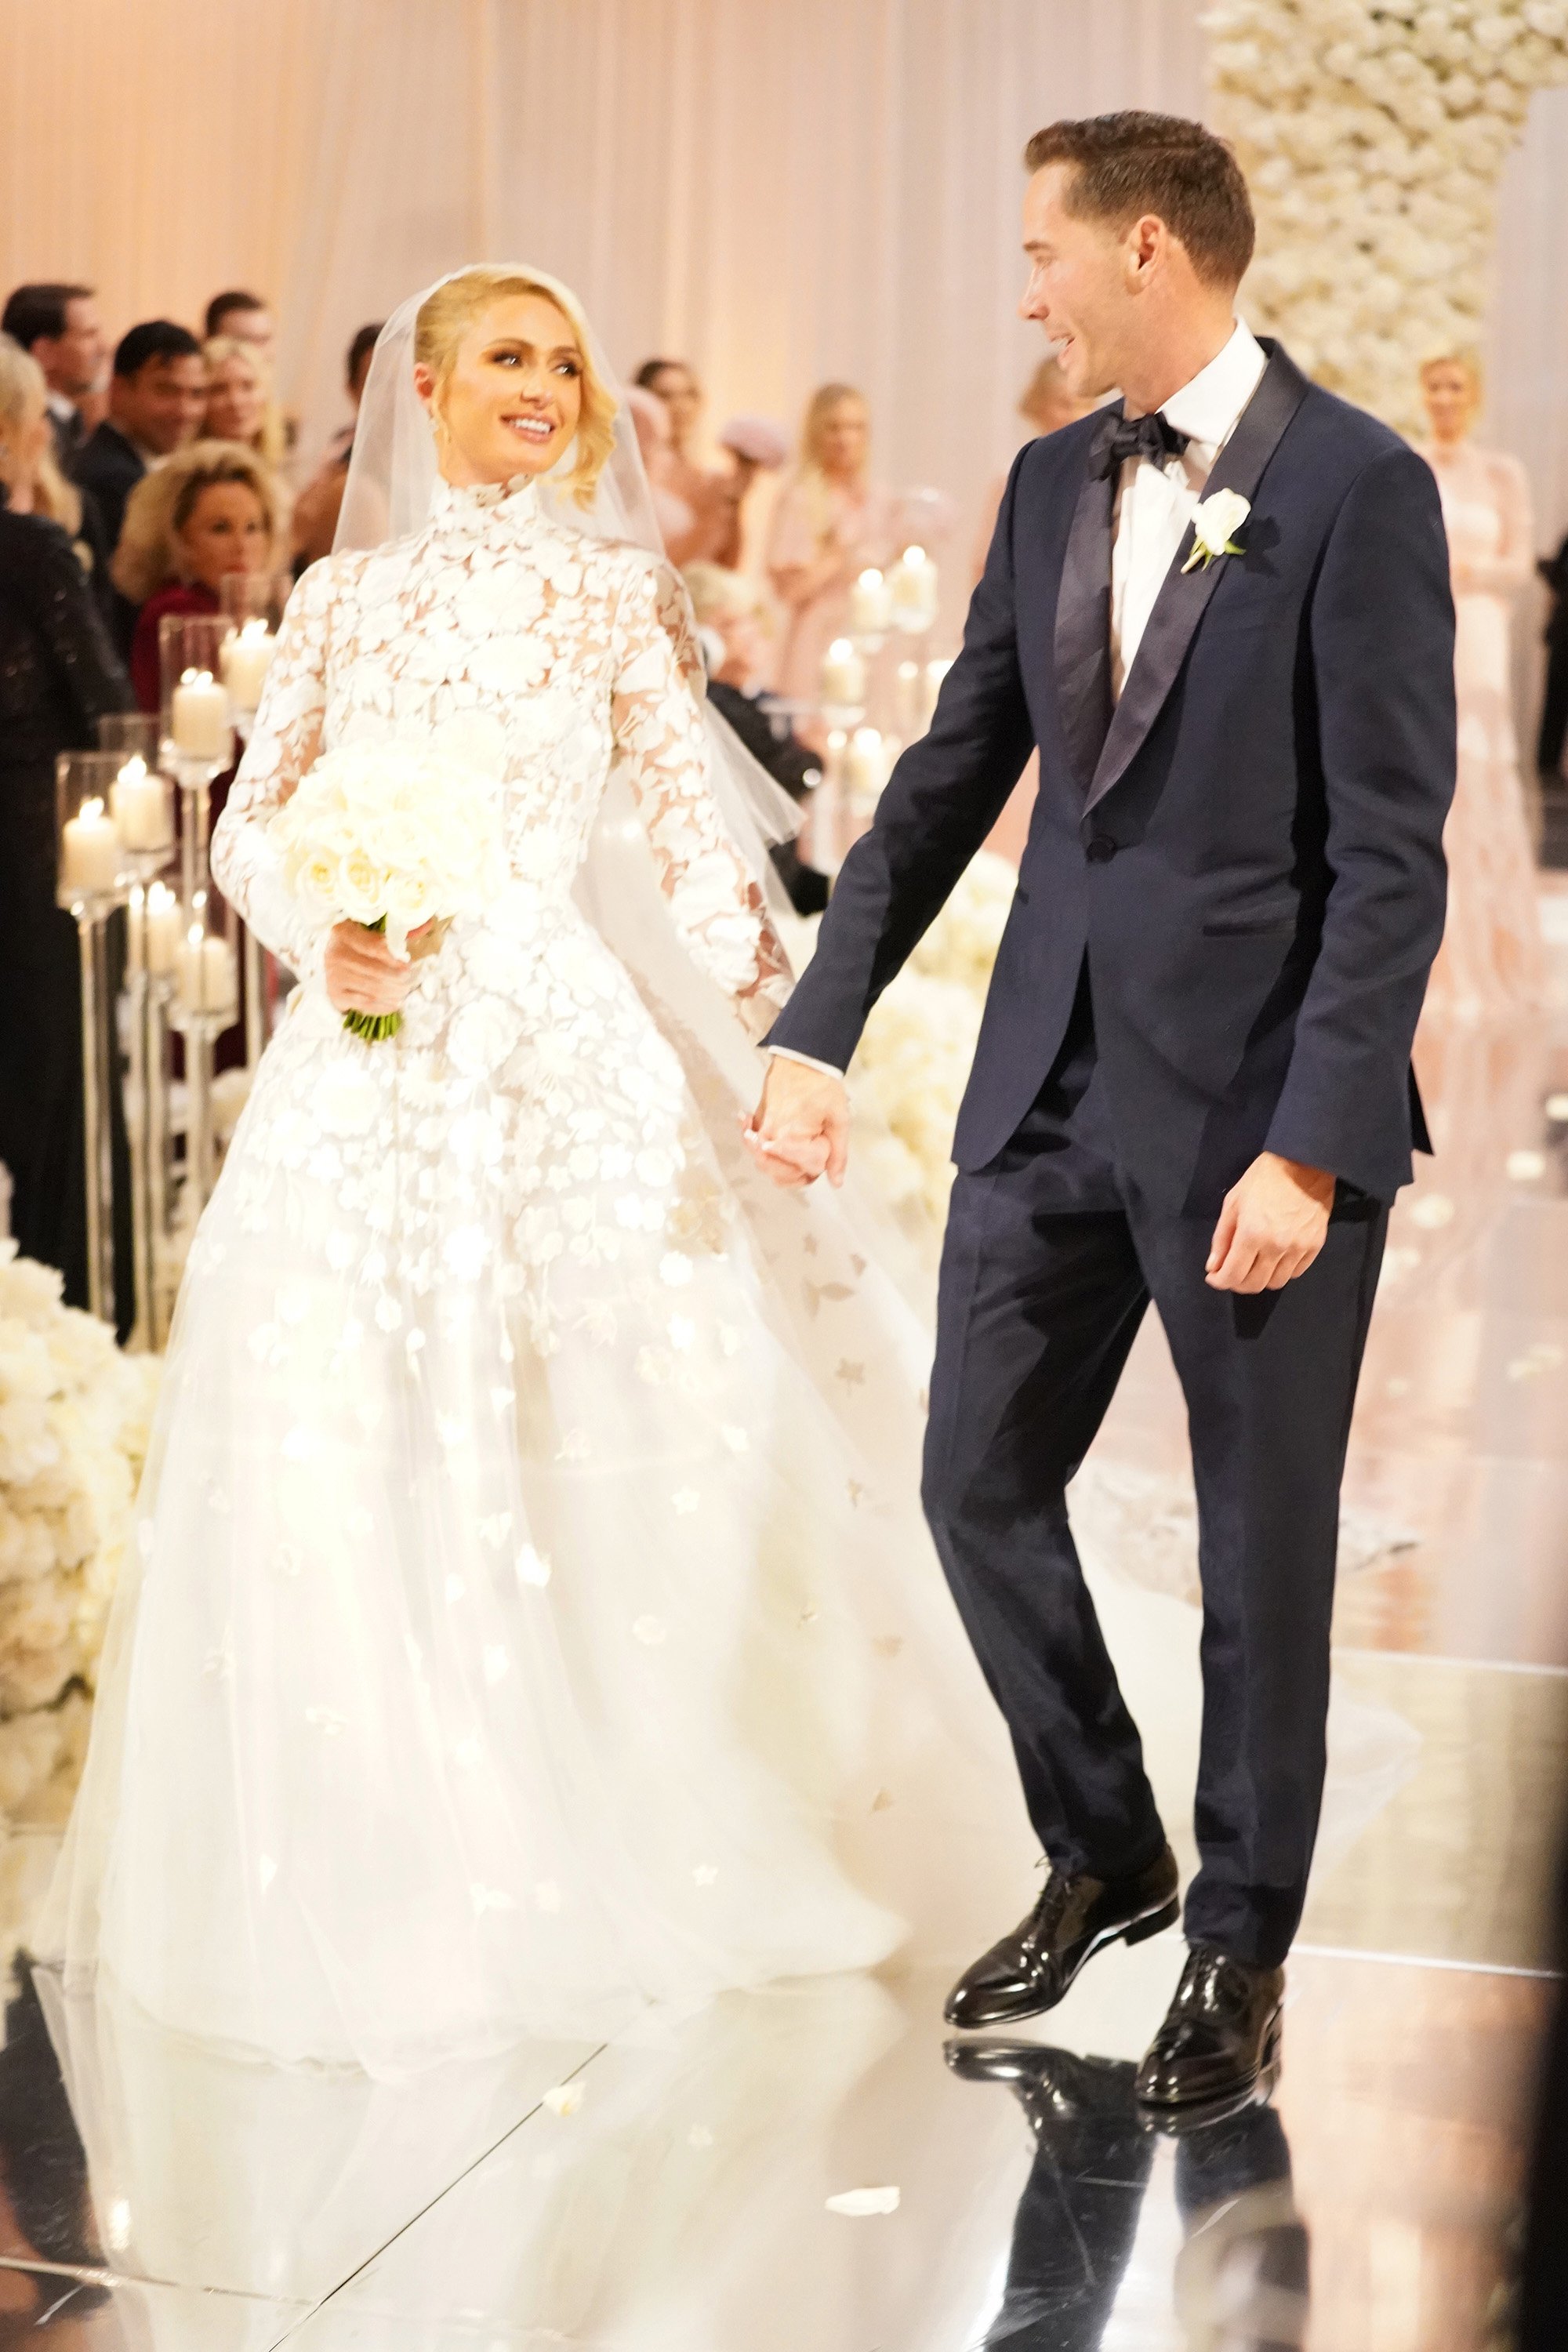 Paris Hilton and Carter Reum on their wedding day on November 11, 2021 | Source: Getty Images 